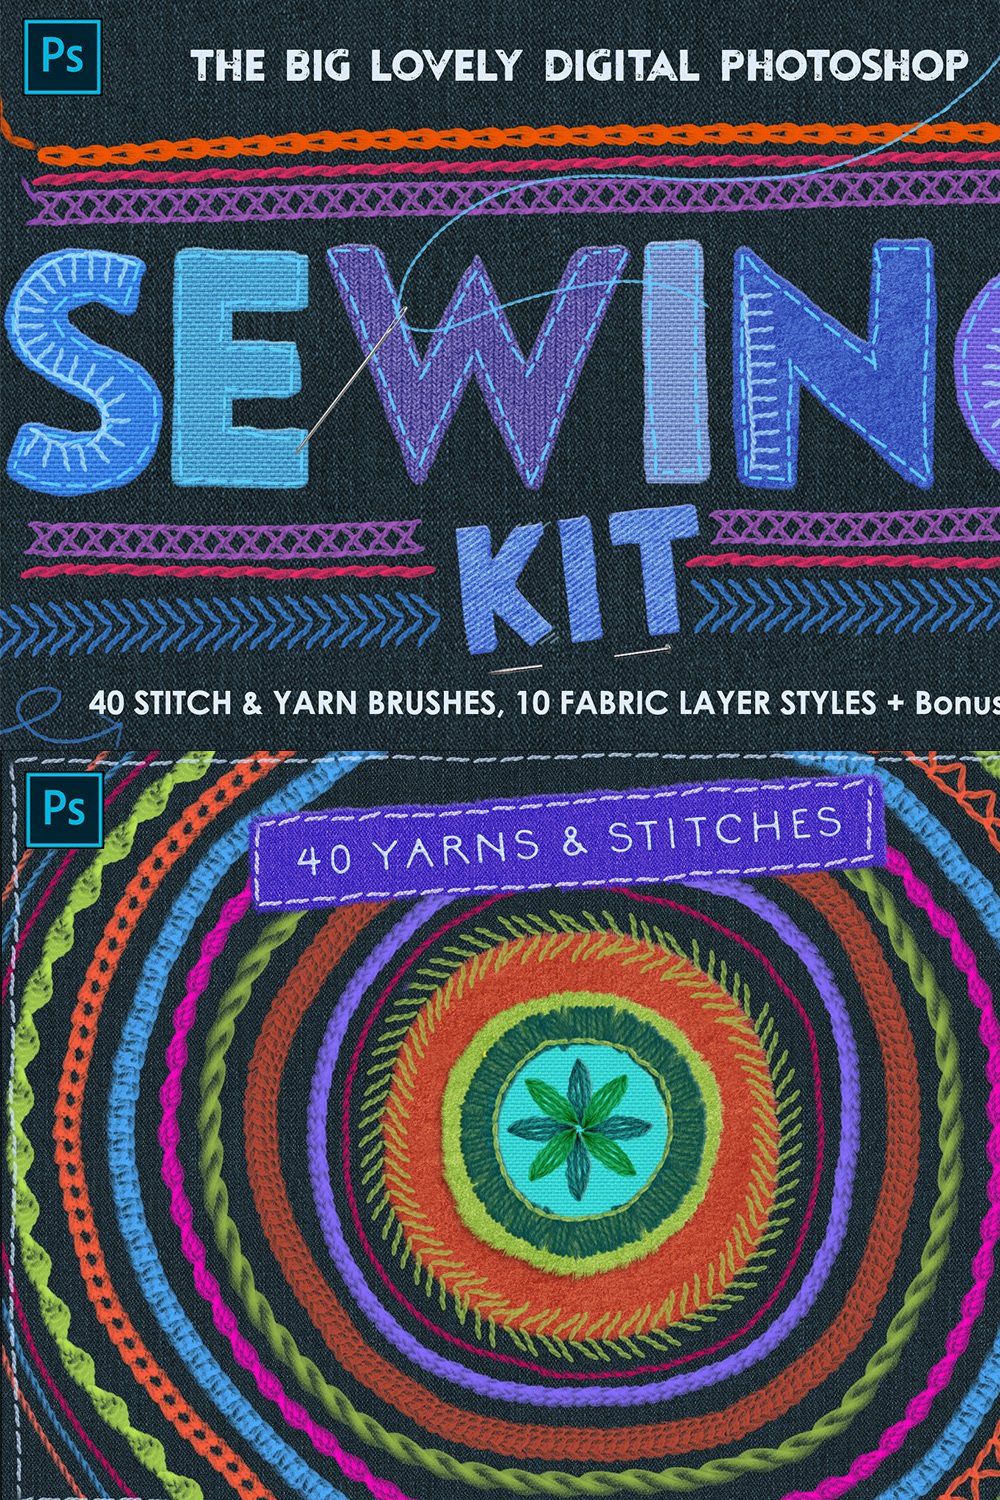 Sewing & Embroidery PS Kit pinterest preview image.